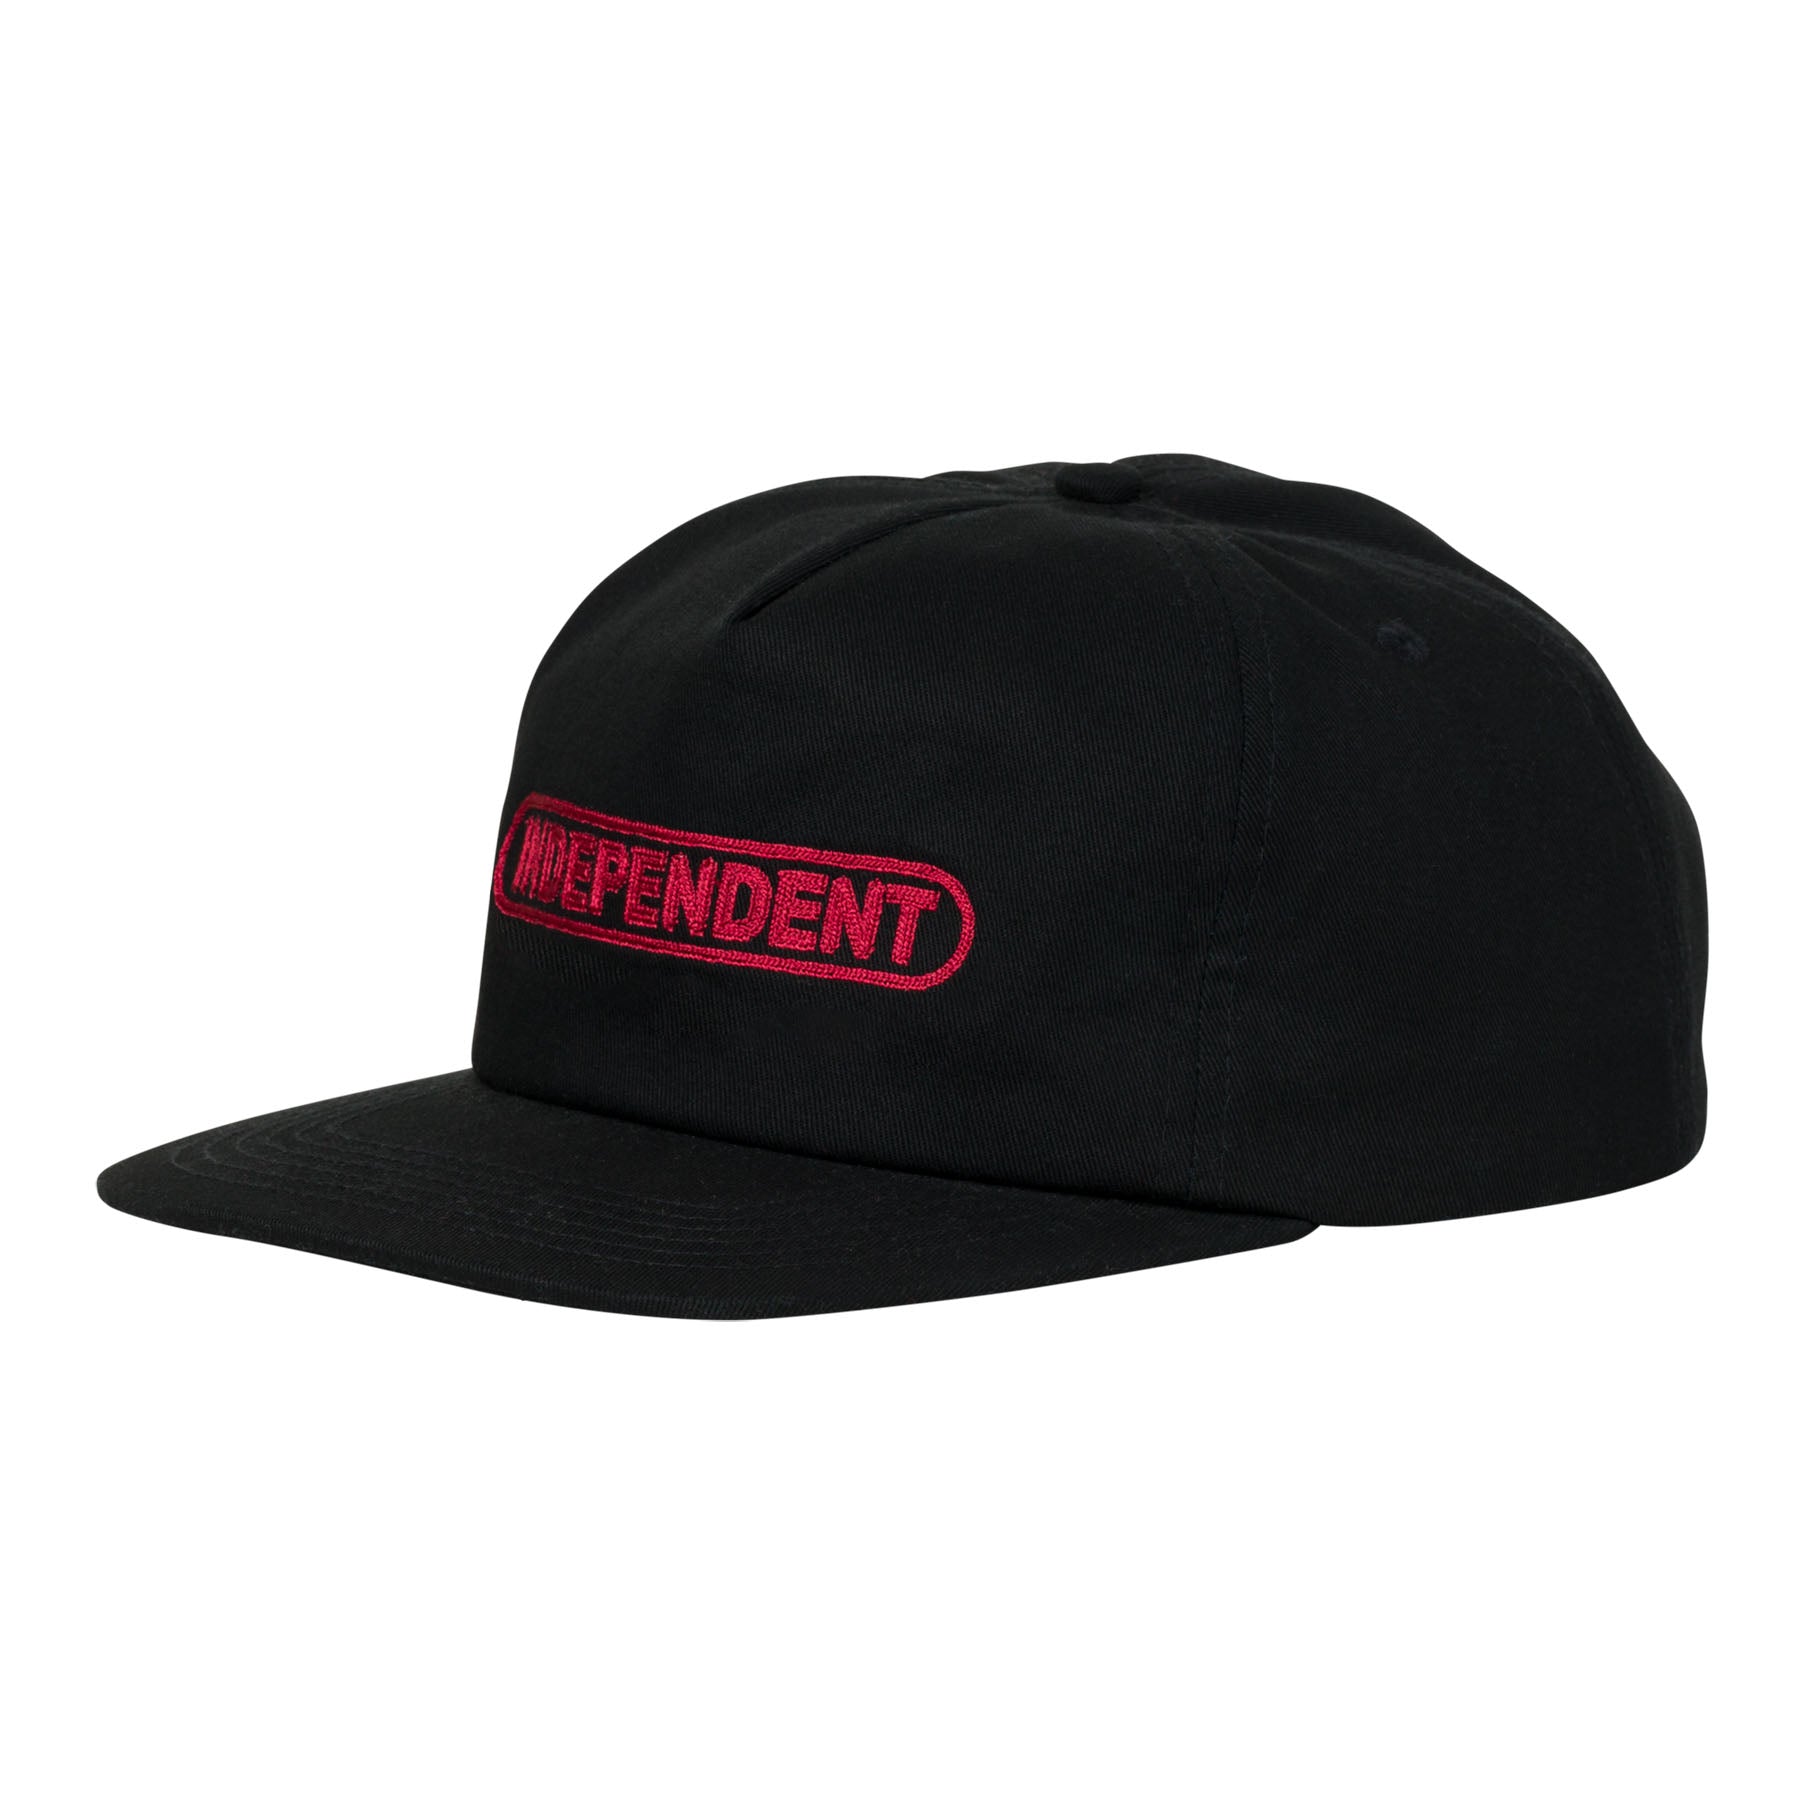 Independent Baseplate Snapback Mid Profile Hat Black OS Unisex - Invisible Board Shop